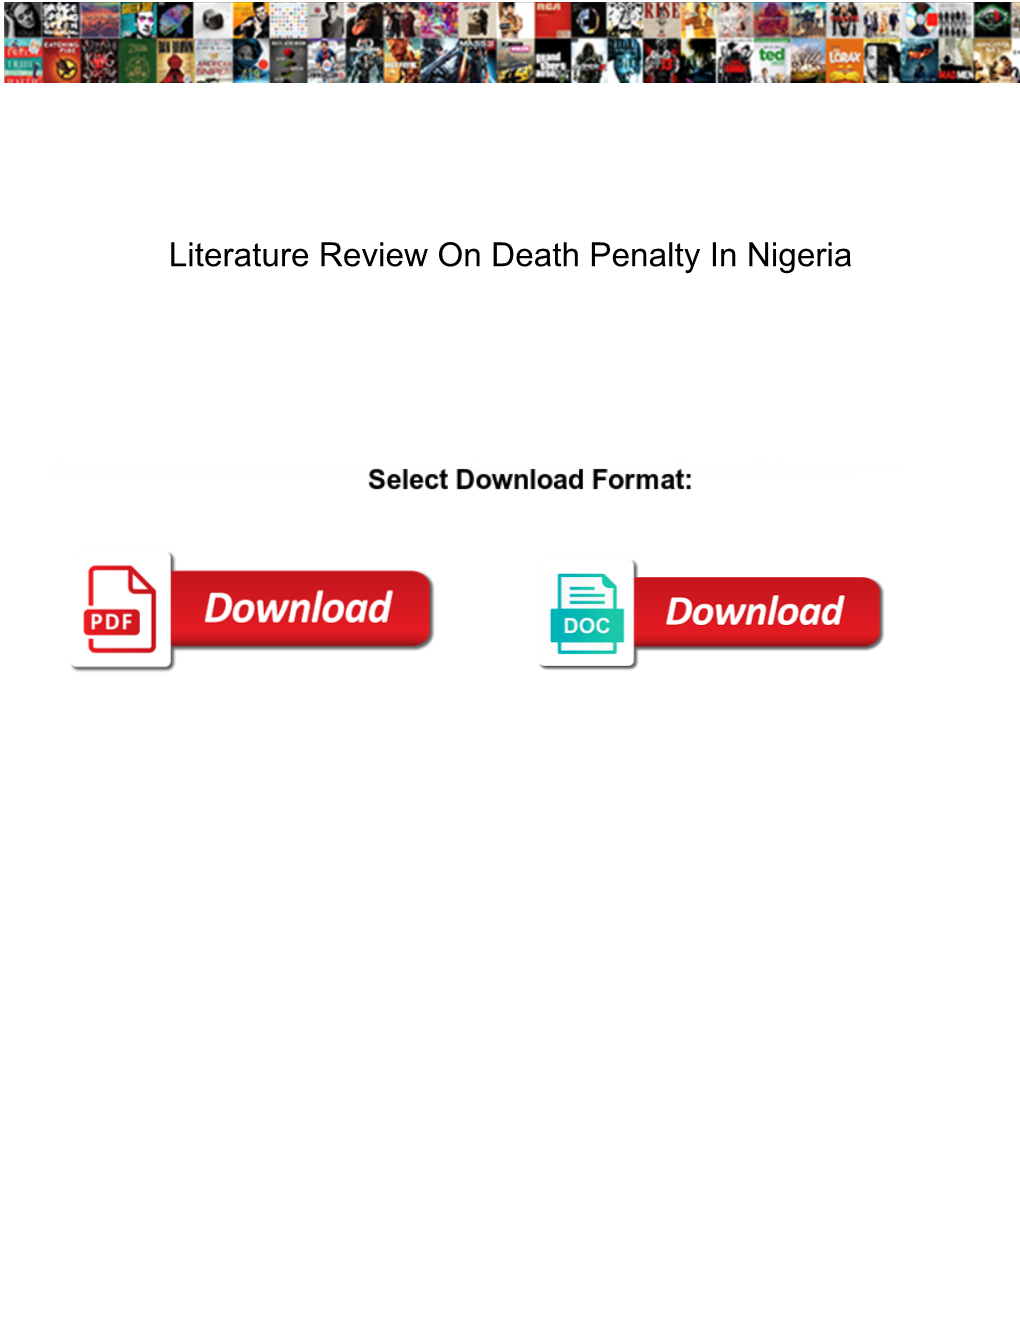 Literature Review on Death Penalty in Nigeria